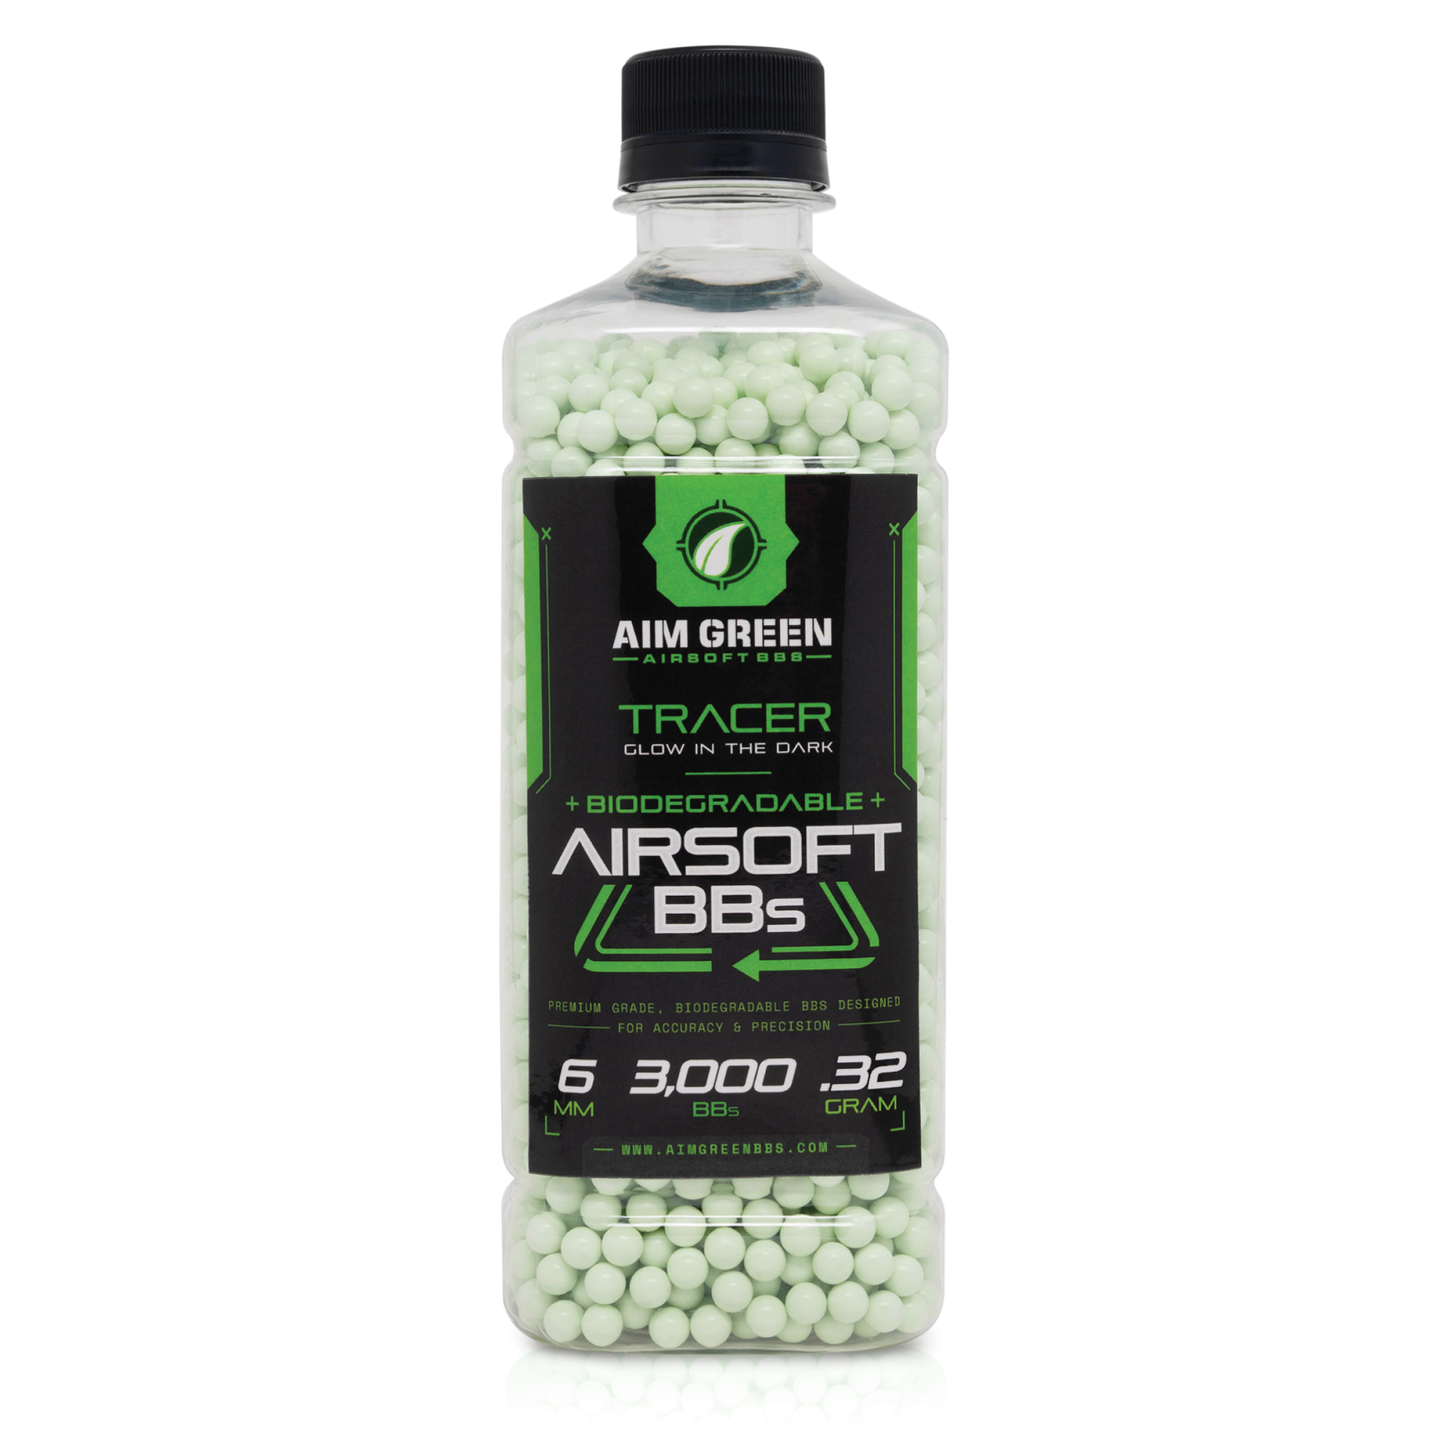 Tracer Biodegradable Airsoft BBs